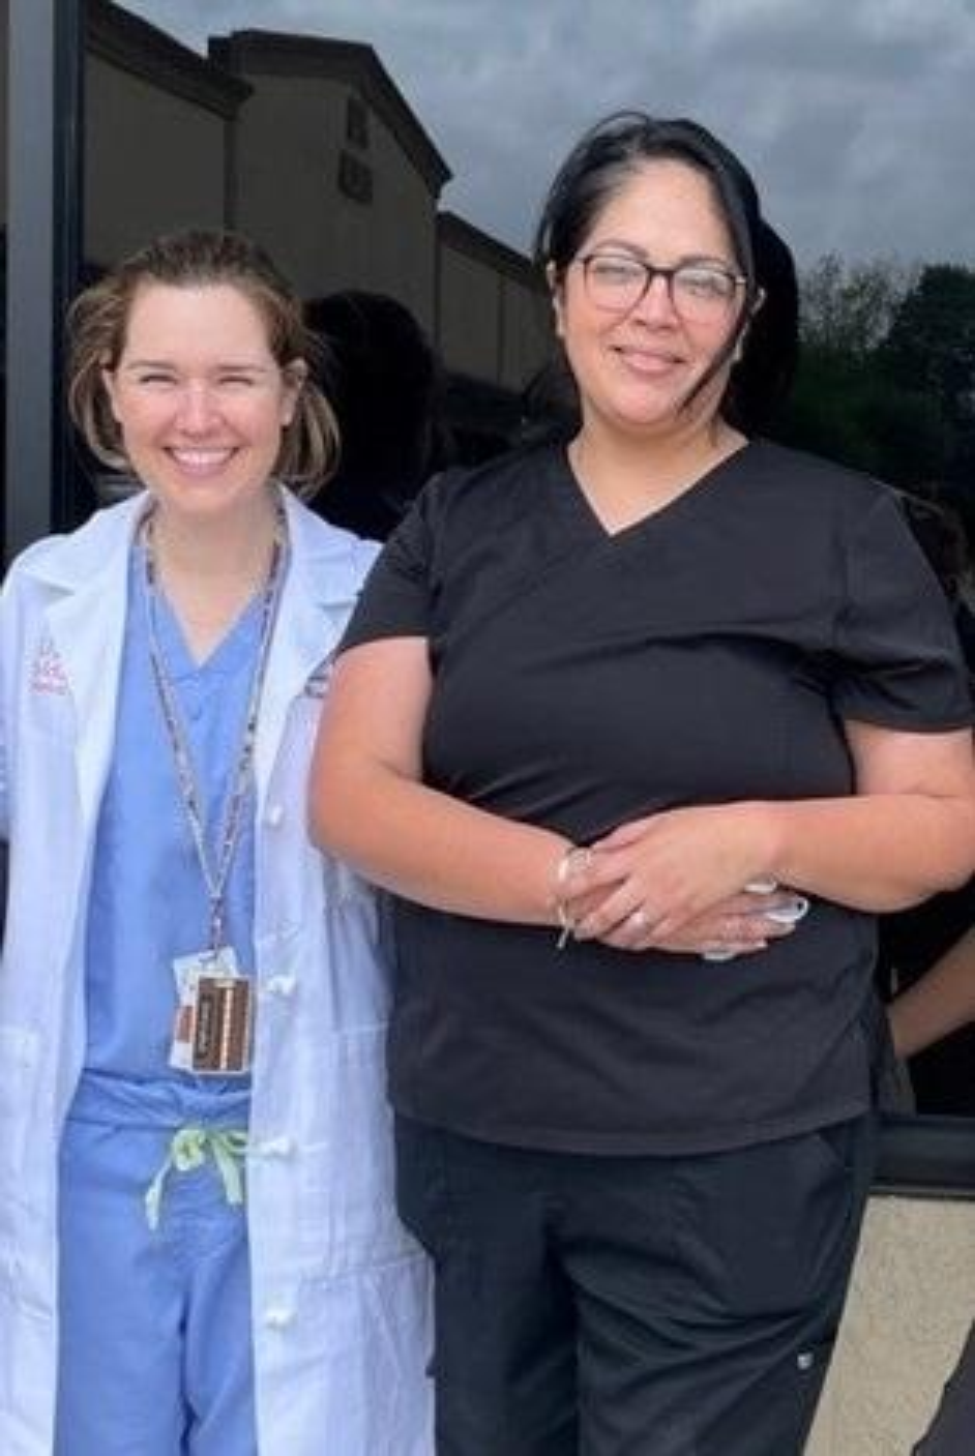 Abigail Zamorano, MD, left, and Juana Espino, right, take the lead in coordinating the Houston PAP Project at two UT Physicians locations. (Photo provided by Abigail Zamorano)